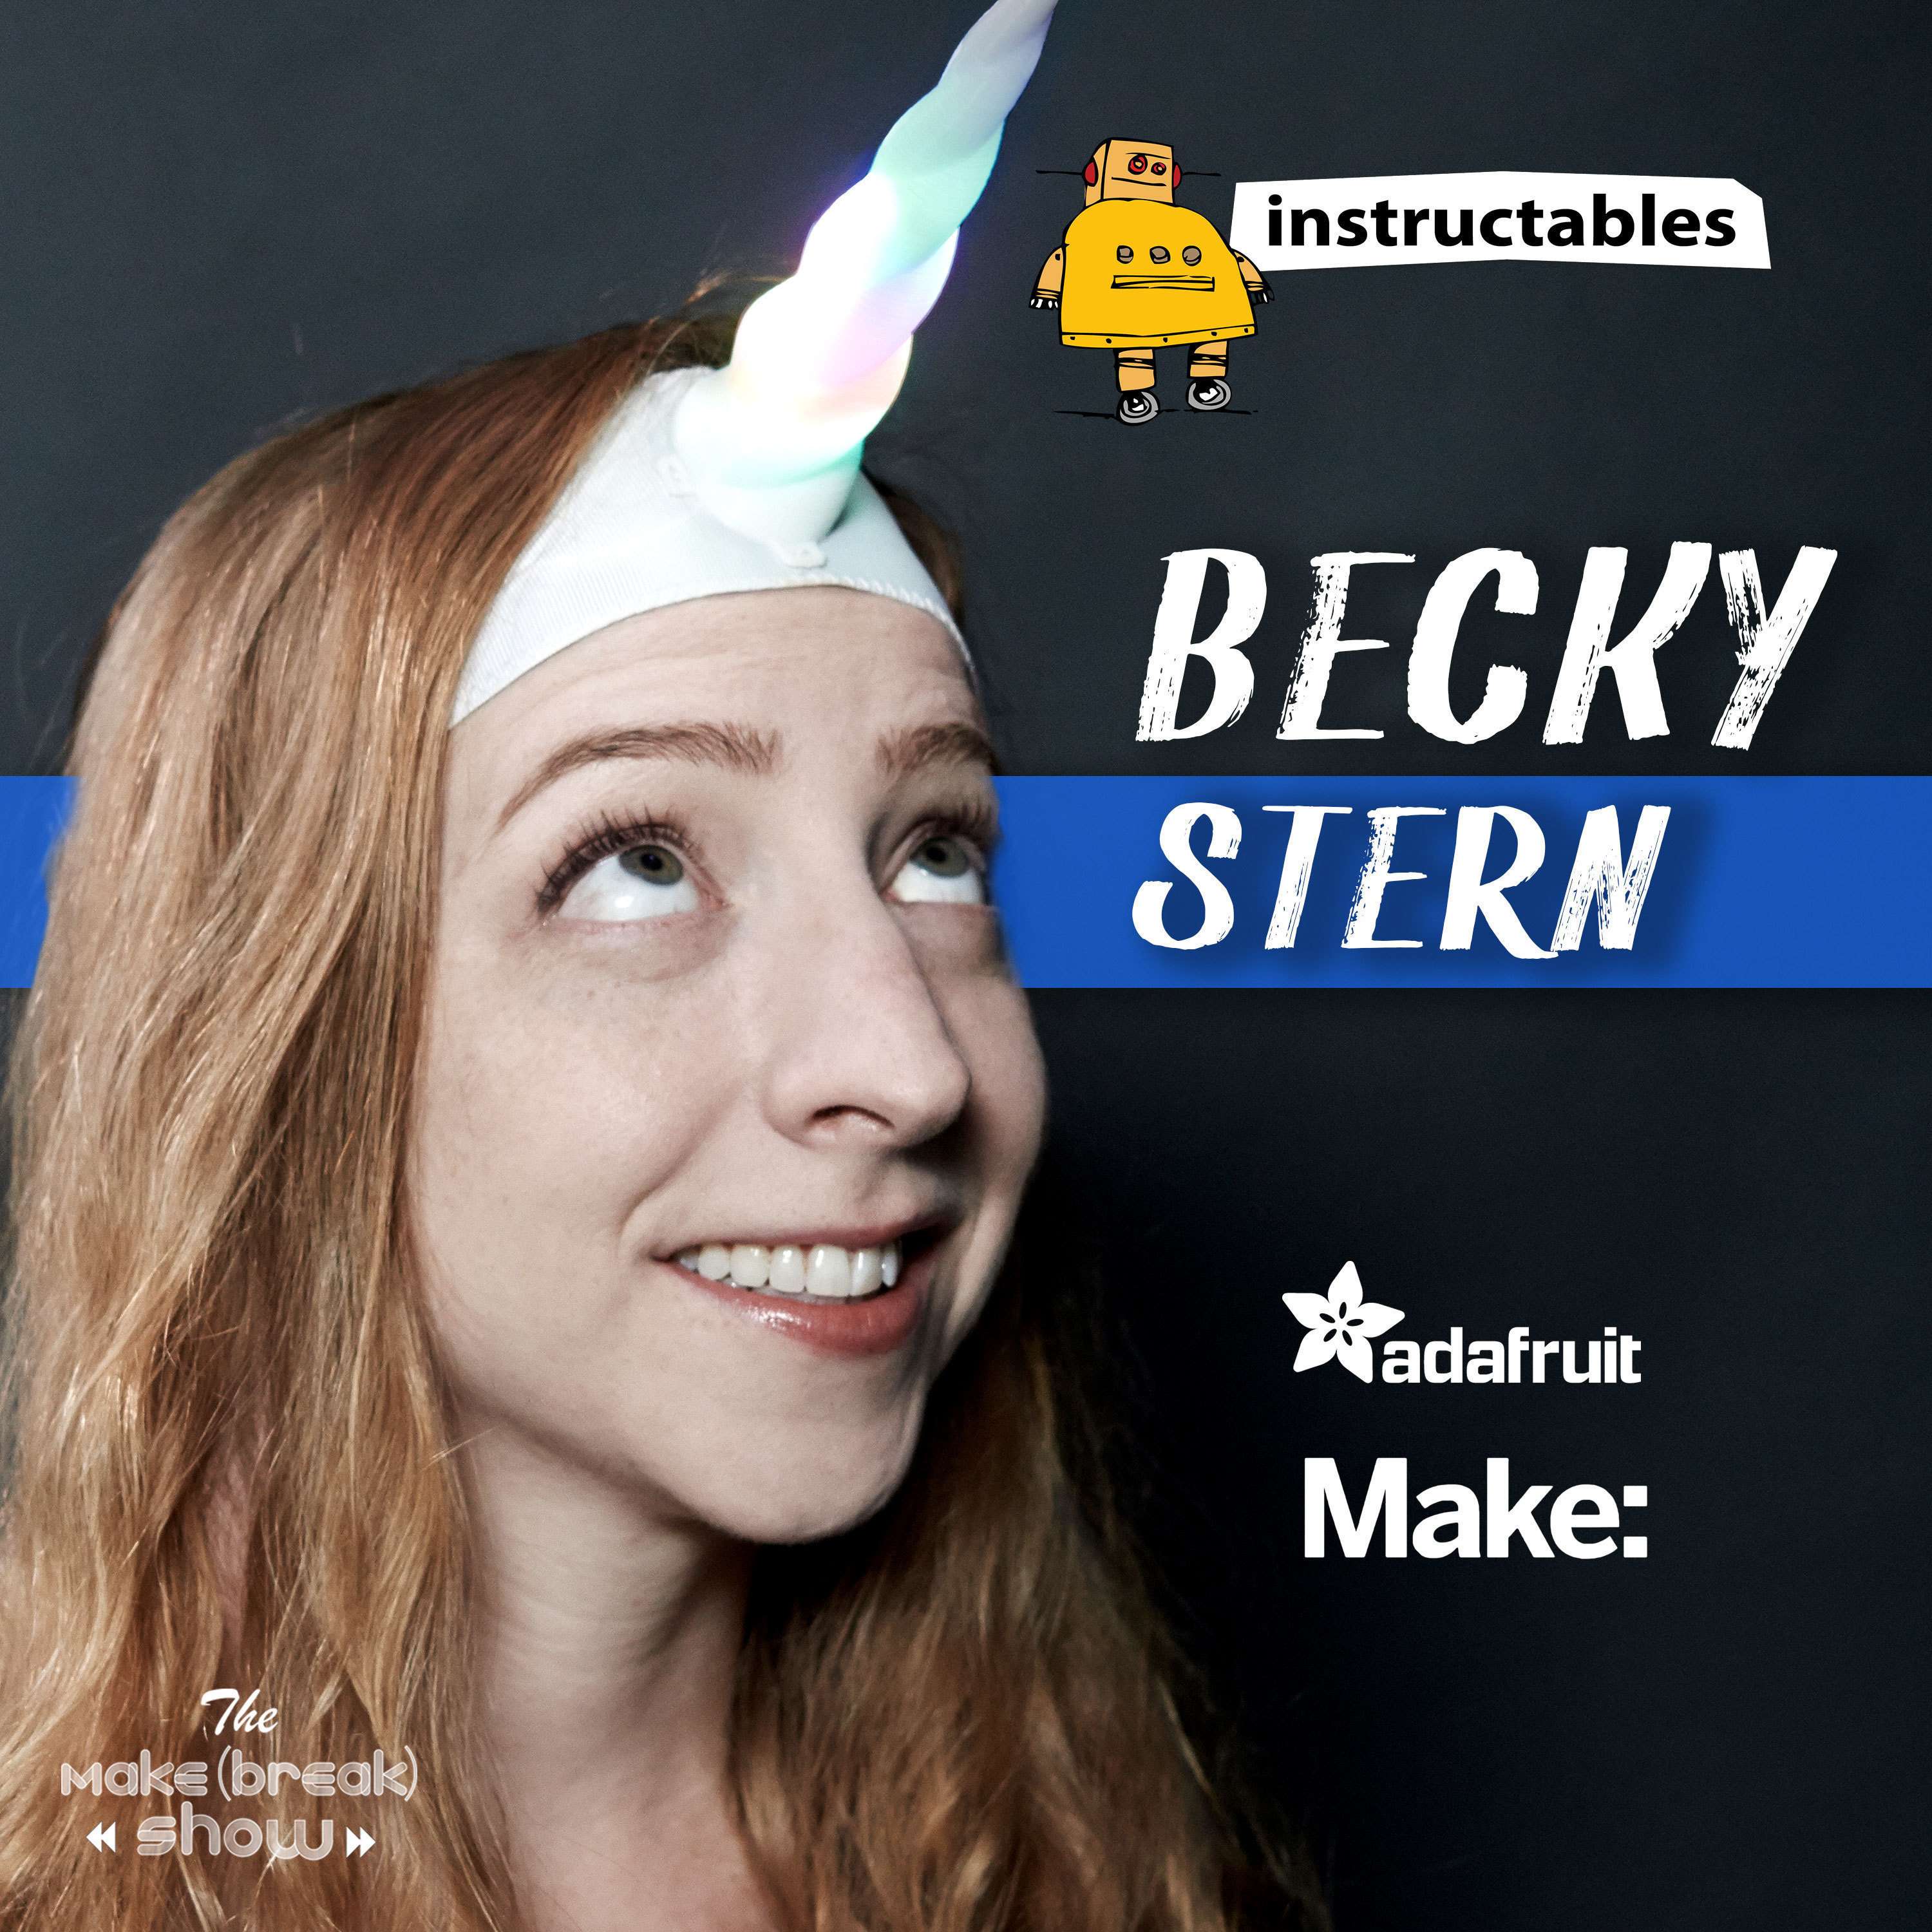 051: Create the perfect project tutorial with Instructables Becky Stern